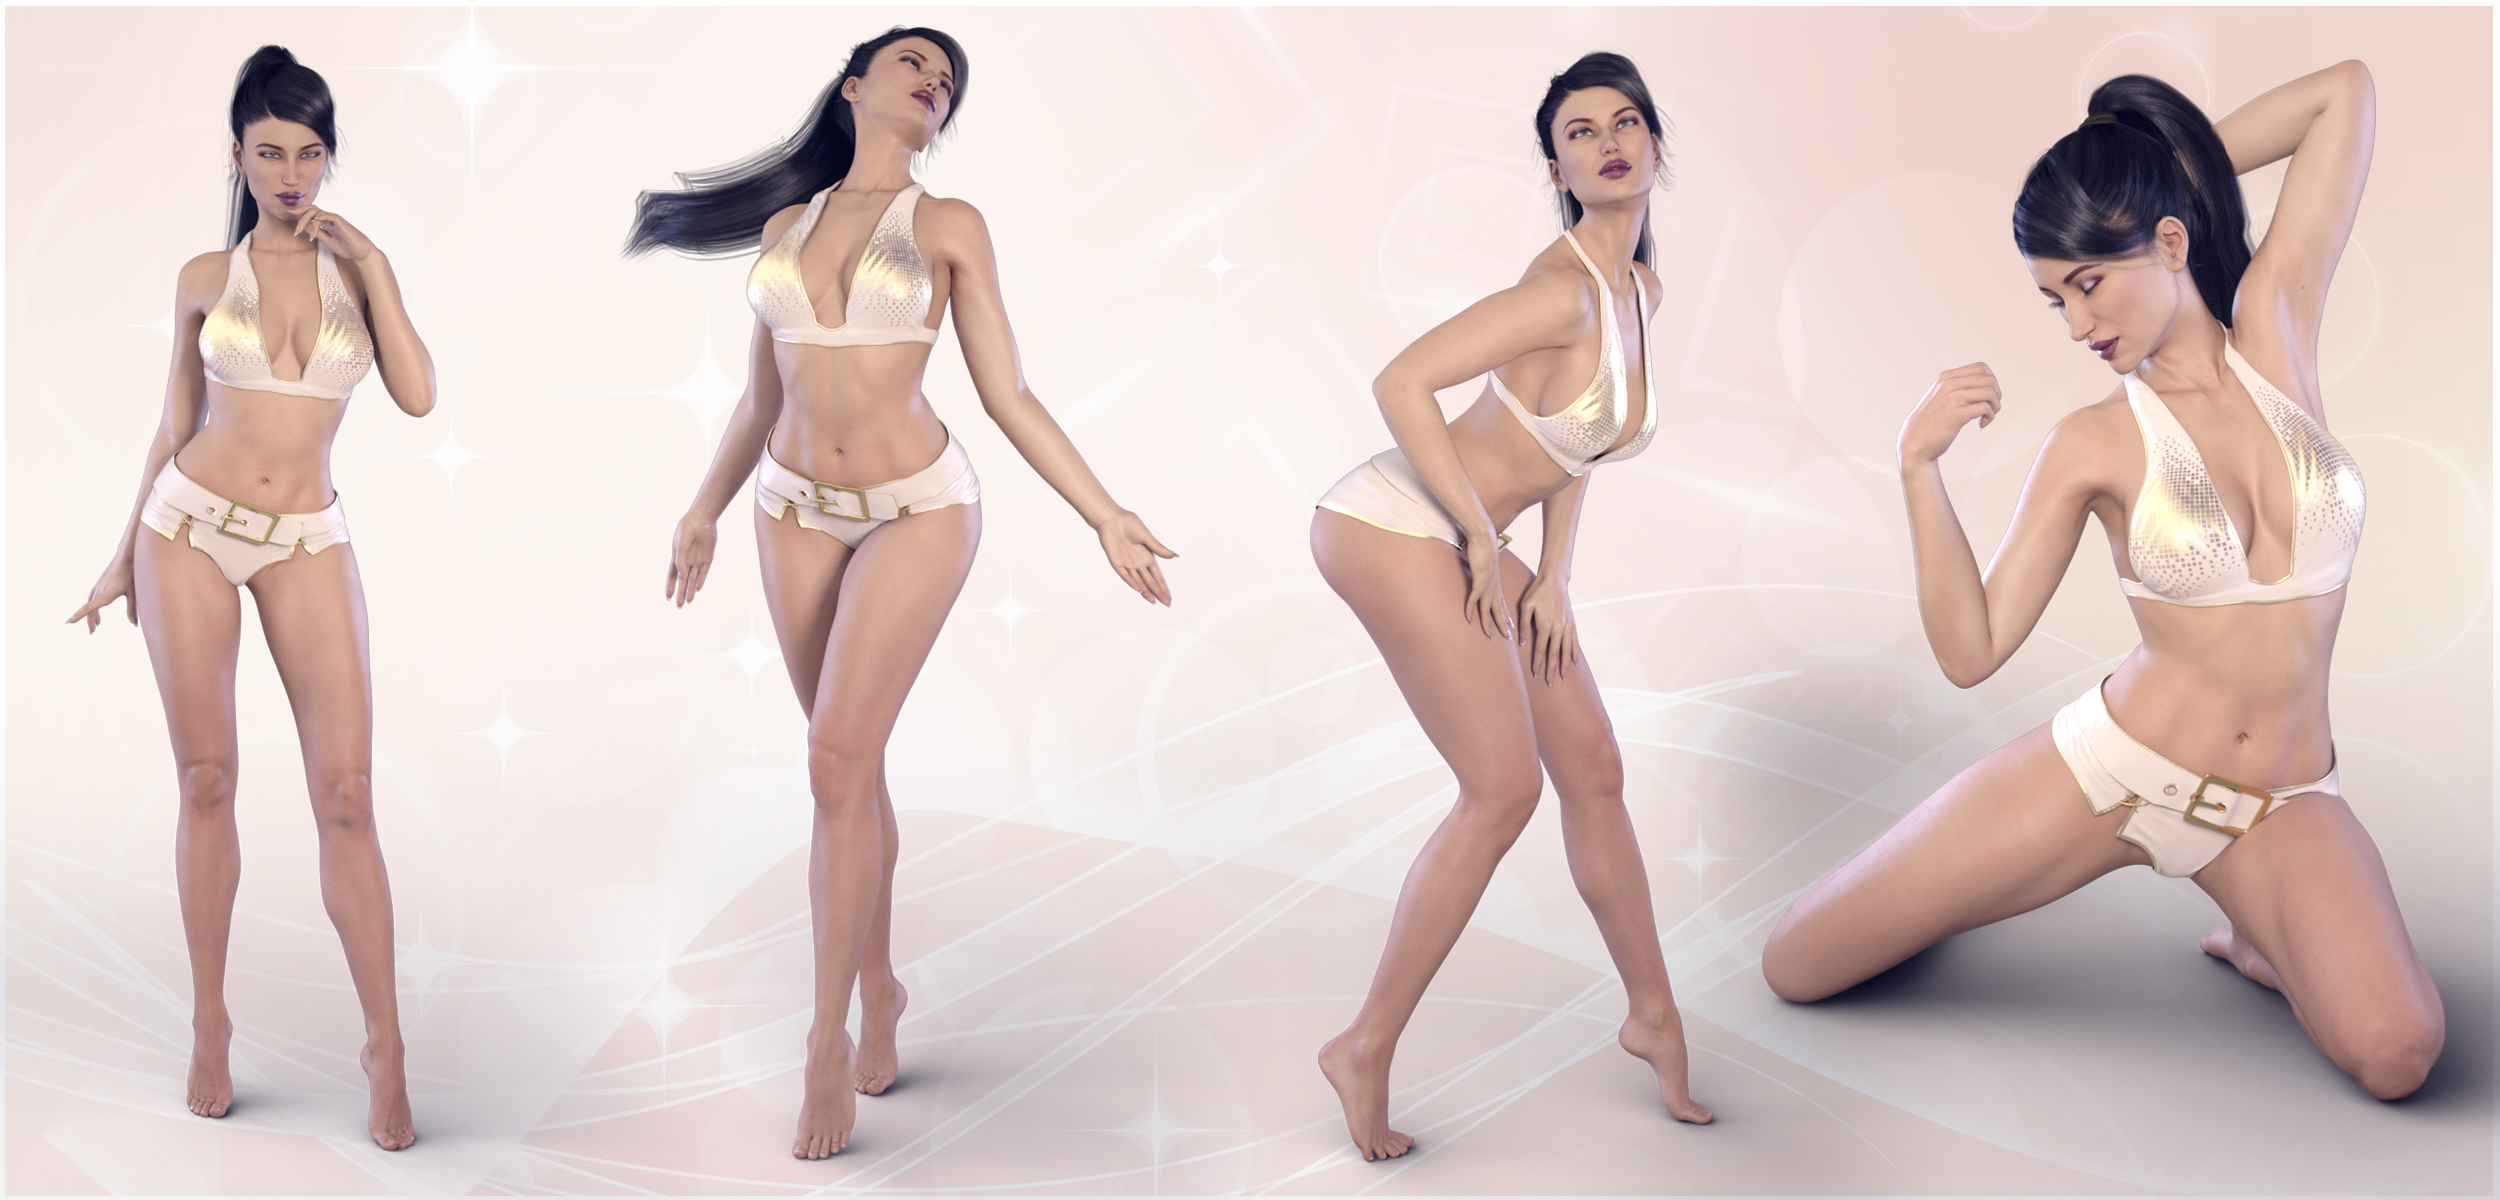 Z Womanly - Poses for Lilith 7 & Genesis 3 Female by: Zeddicuss, 3D Models by Daz 3D